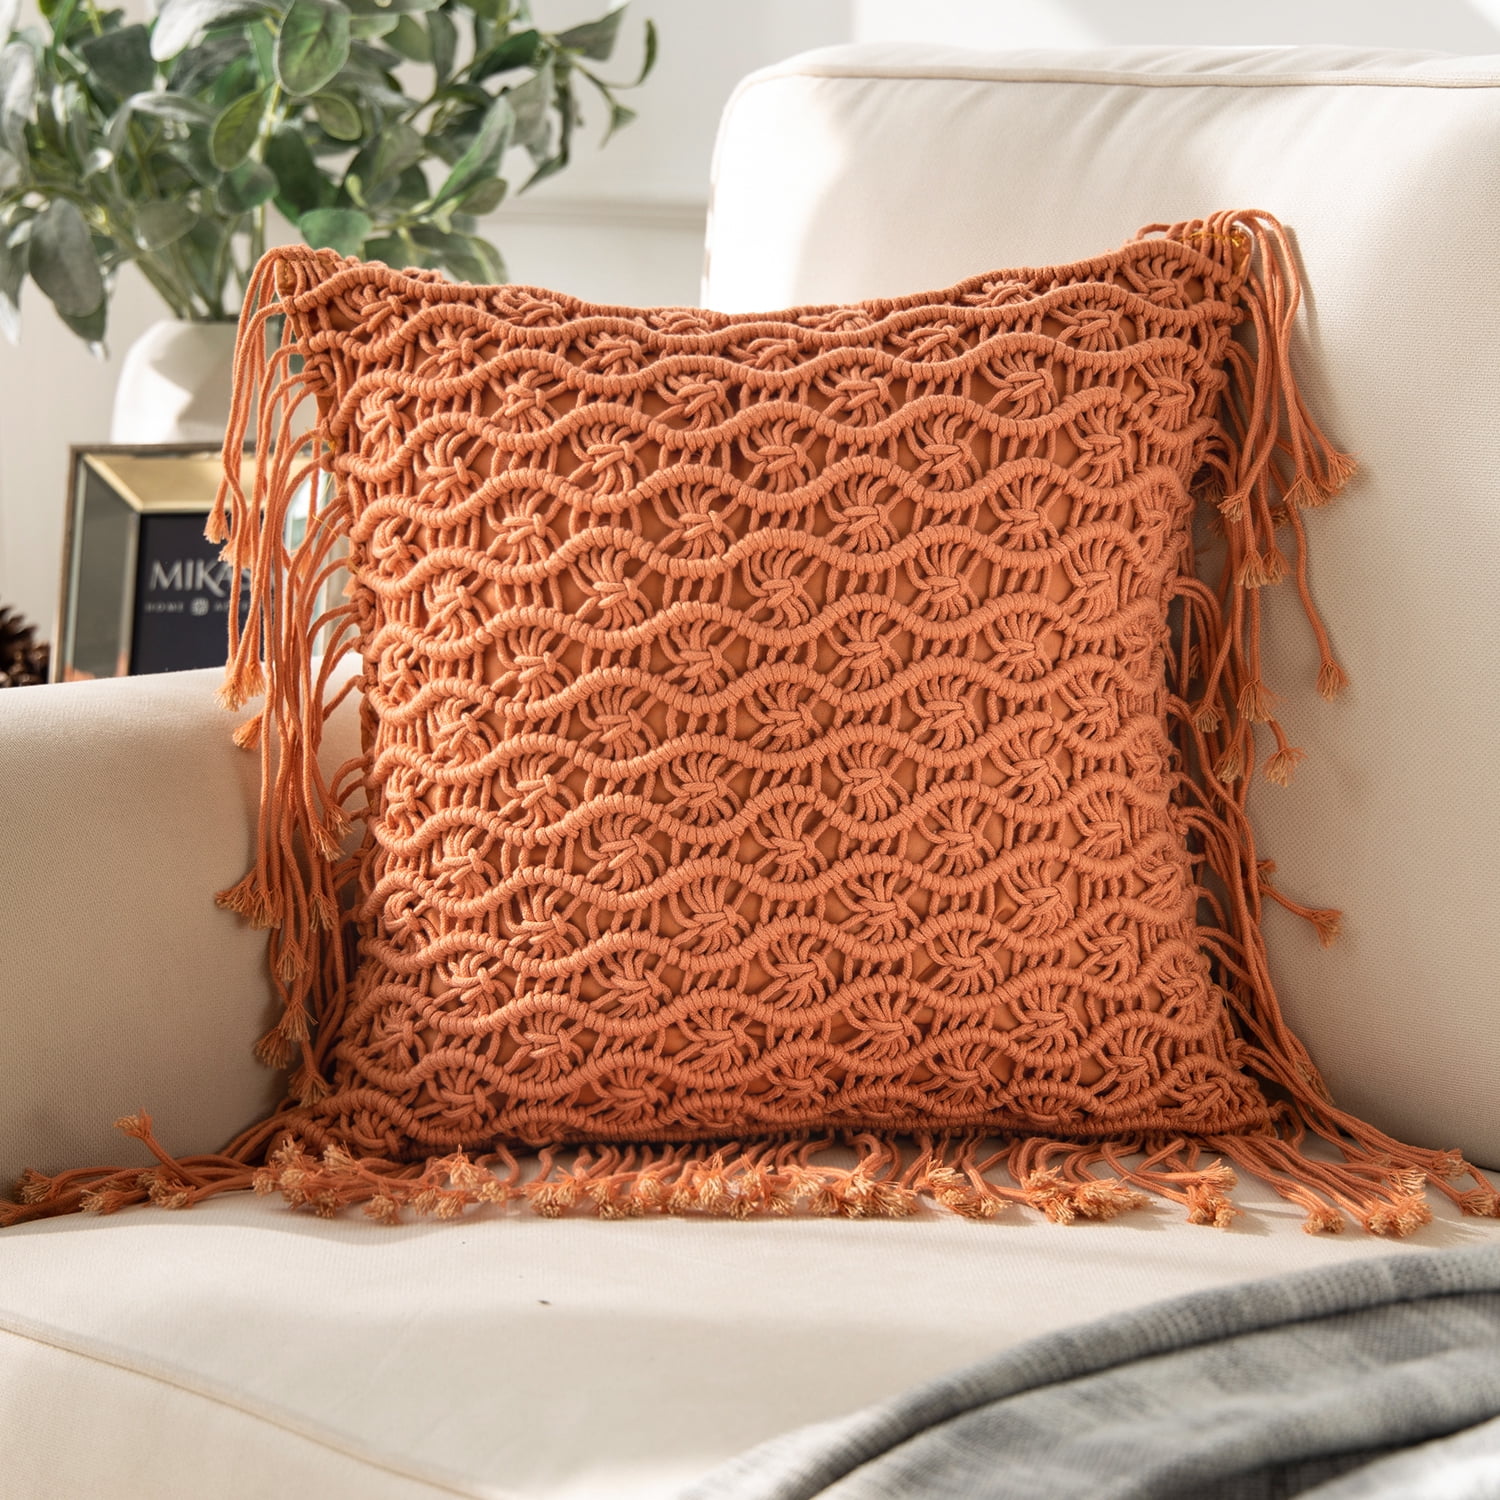 Set of 4 Traditional Pattern Throw Pillow Covers Orange Striped Boho Chic  Decor, 4 Cushion Cover Sets 17x17 19x19 21x21 27x27 Inch 